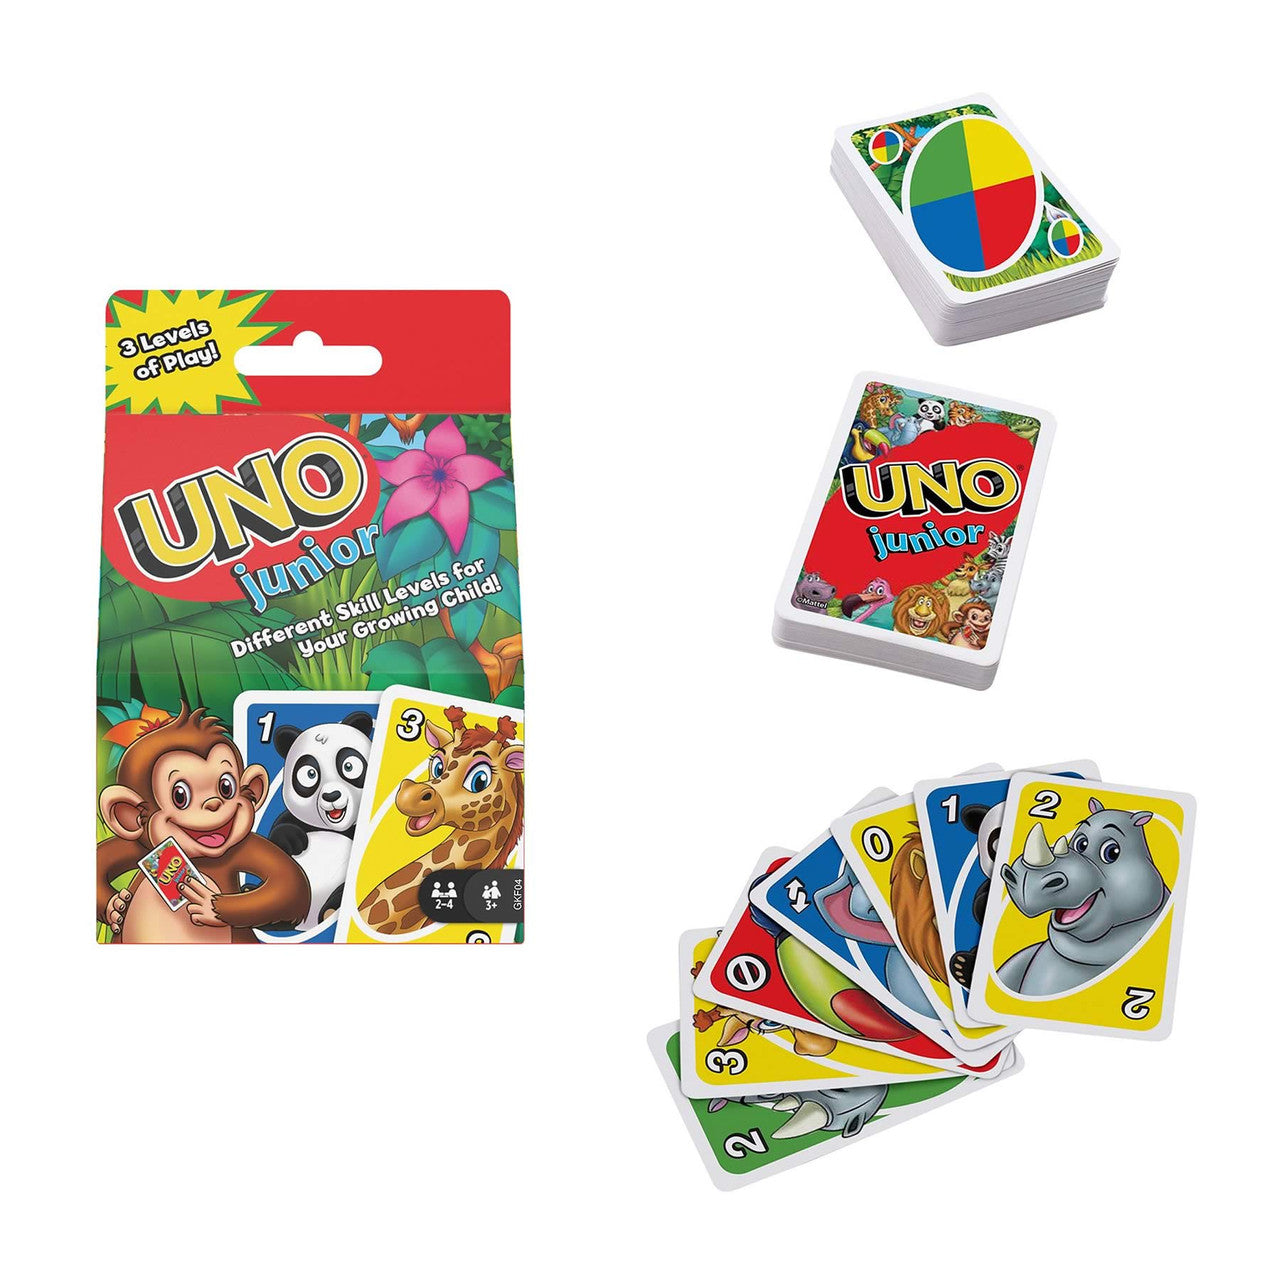 Mattel Games UNO Junior Card Game with 45 Cards